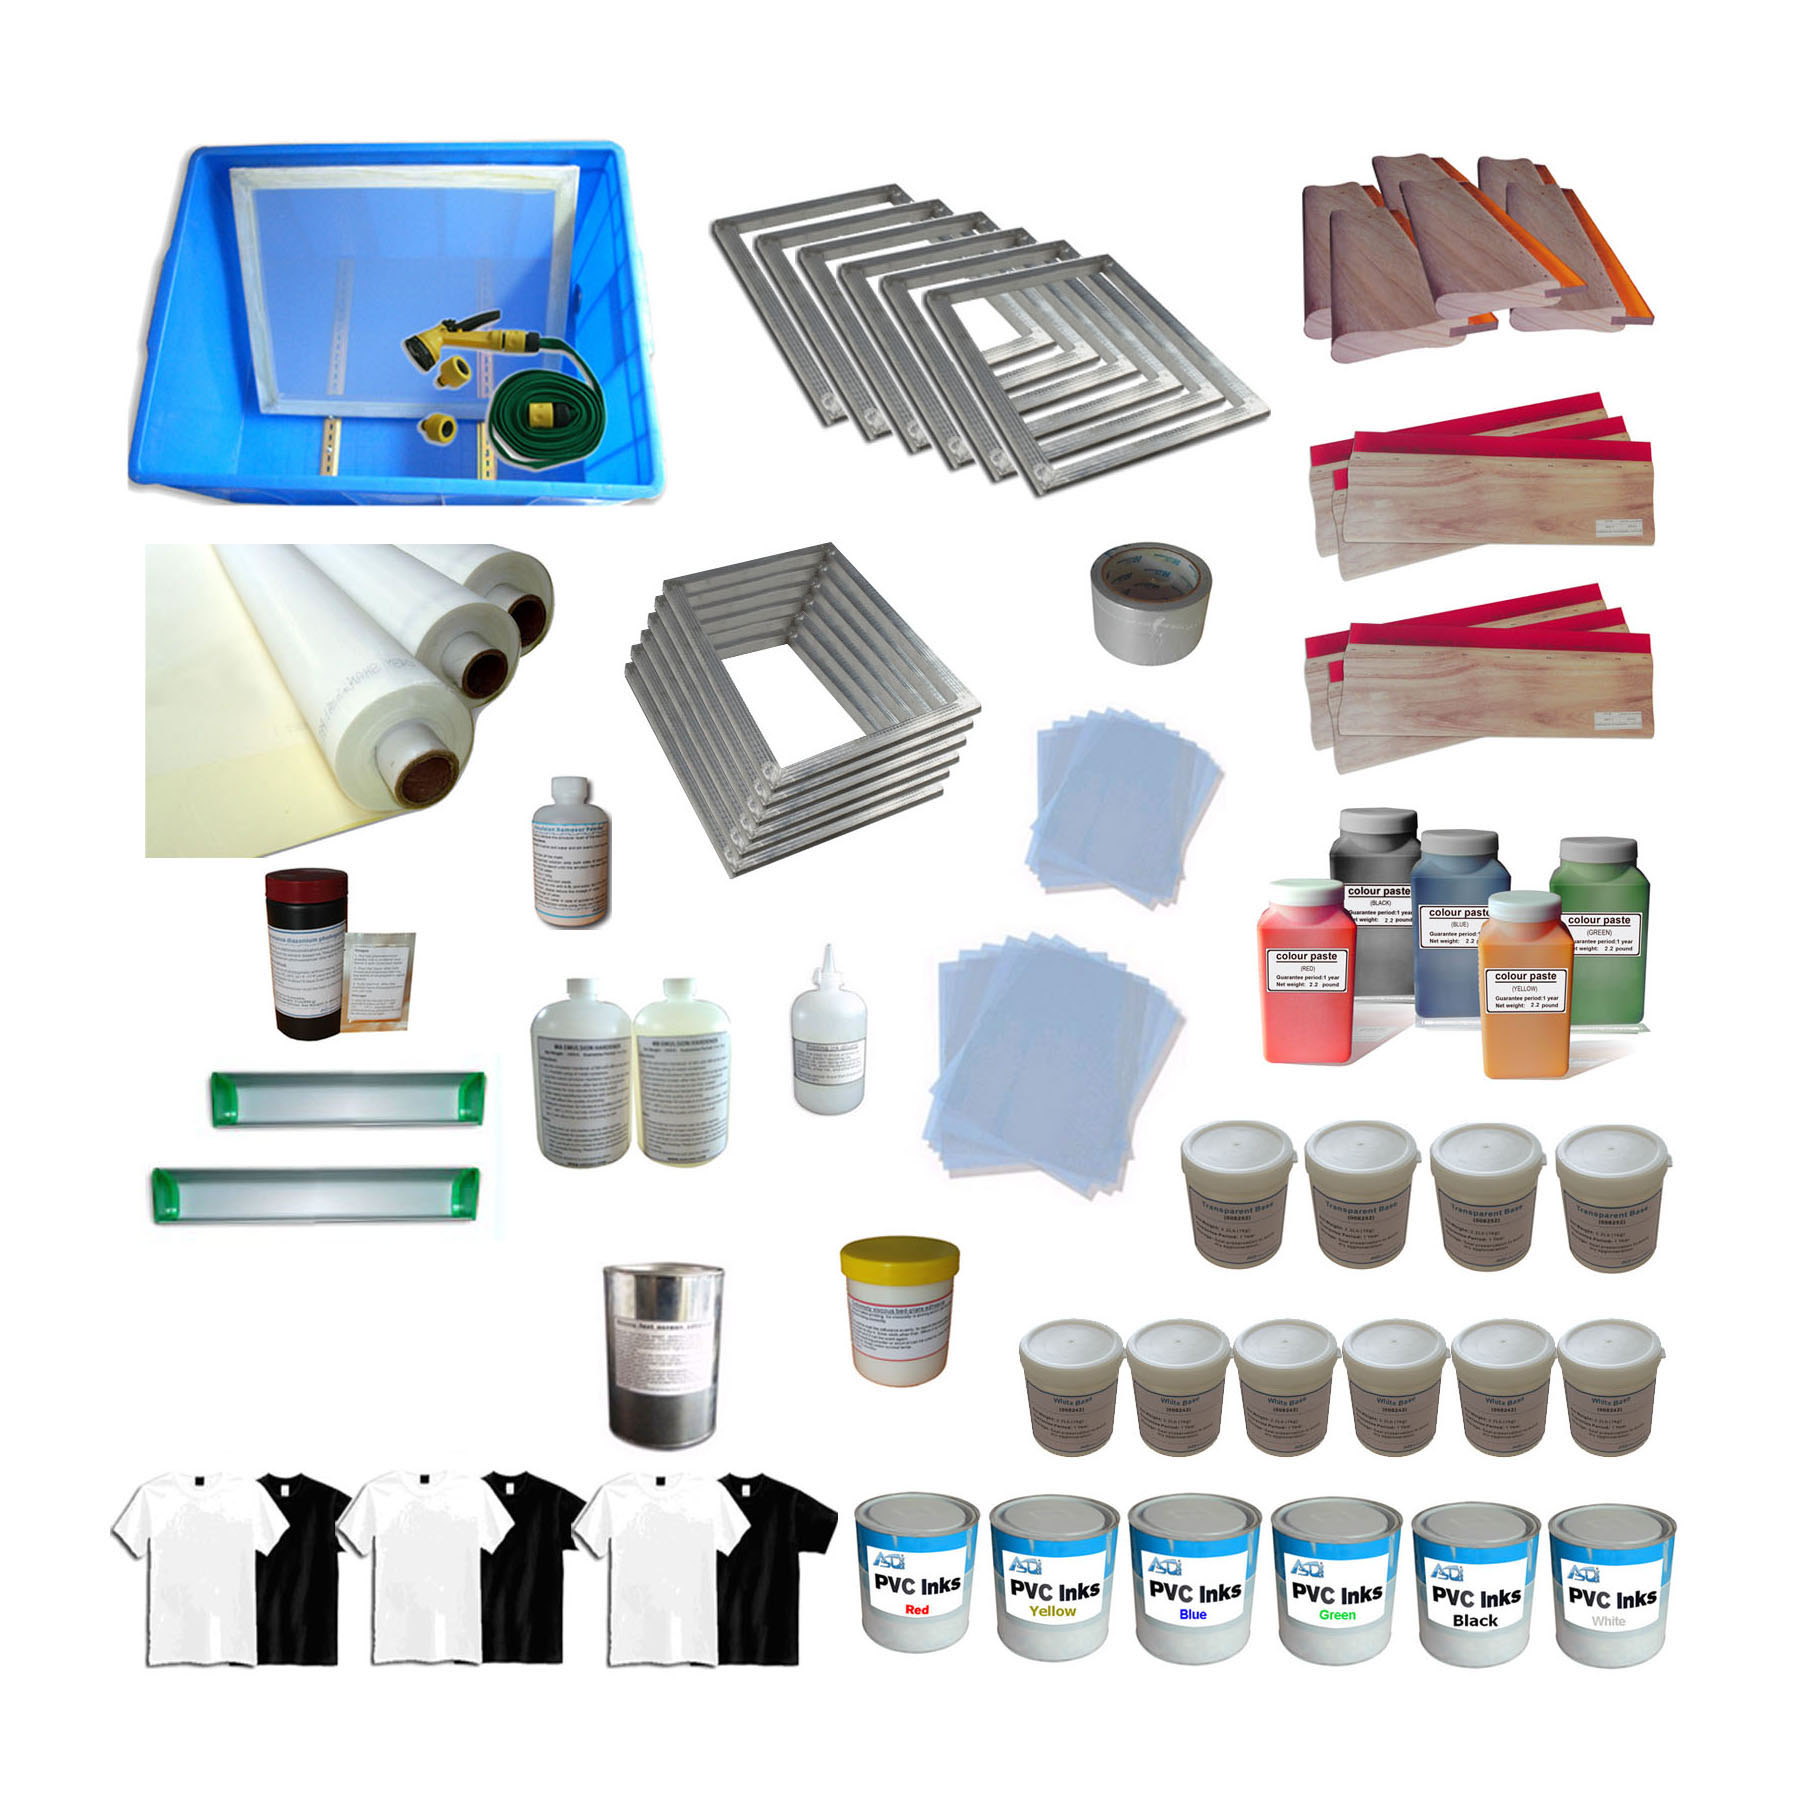 Techtongda 6 Color Silk Screen Printing Accessories Full Set Kit Exposure Unit Squeegee Ink Supply - image 1 of 2